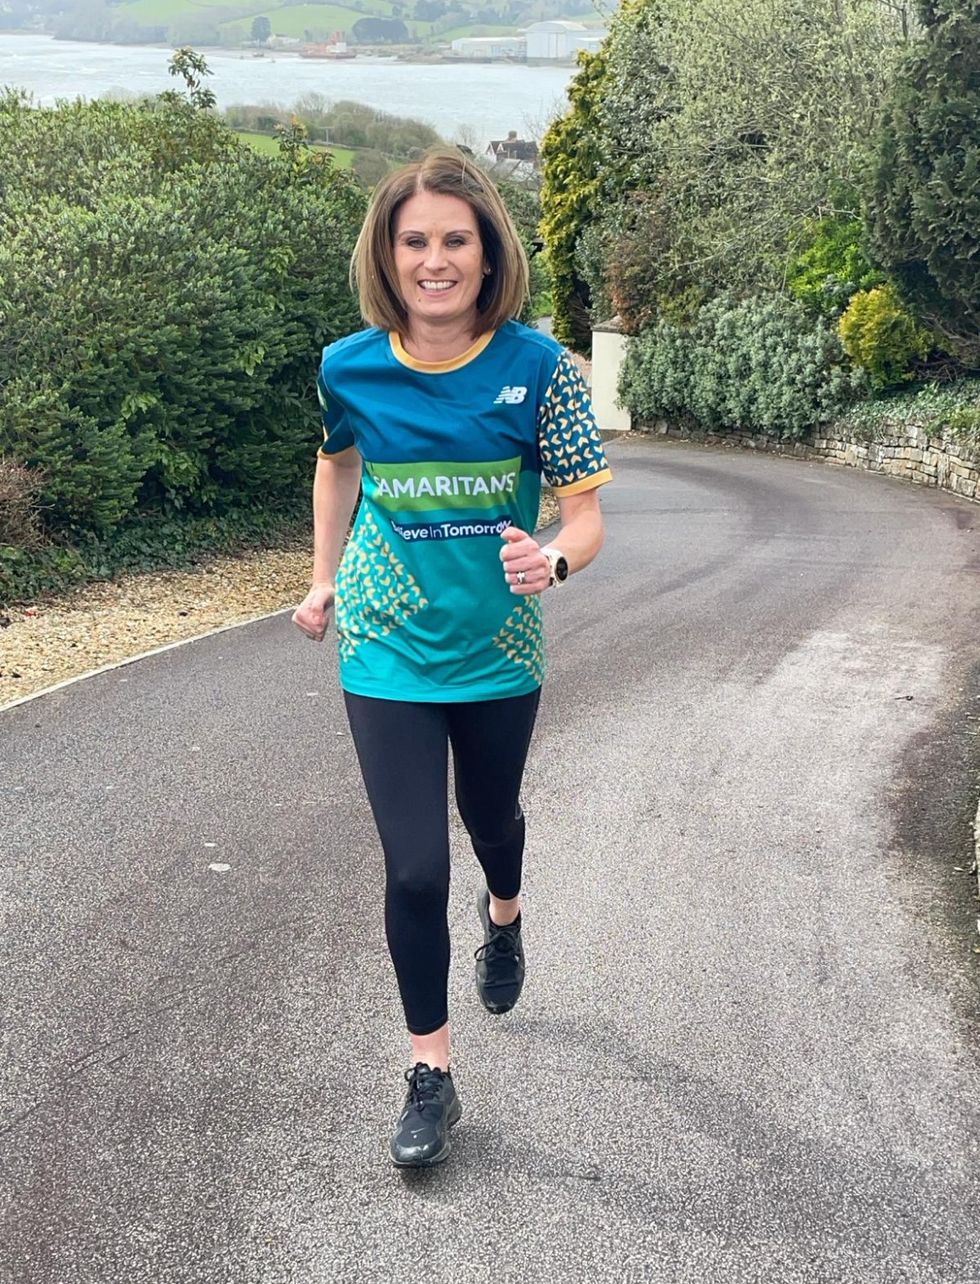 ‘Dad will be with me’ says London Marathon runner supporting Samaritans